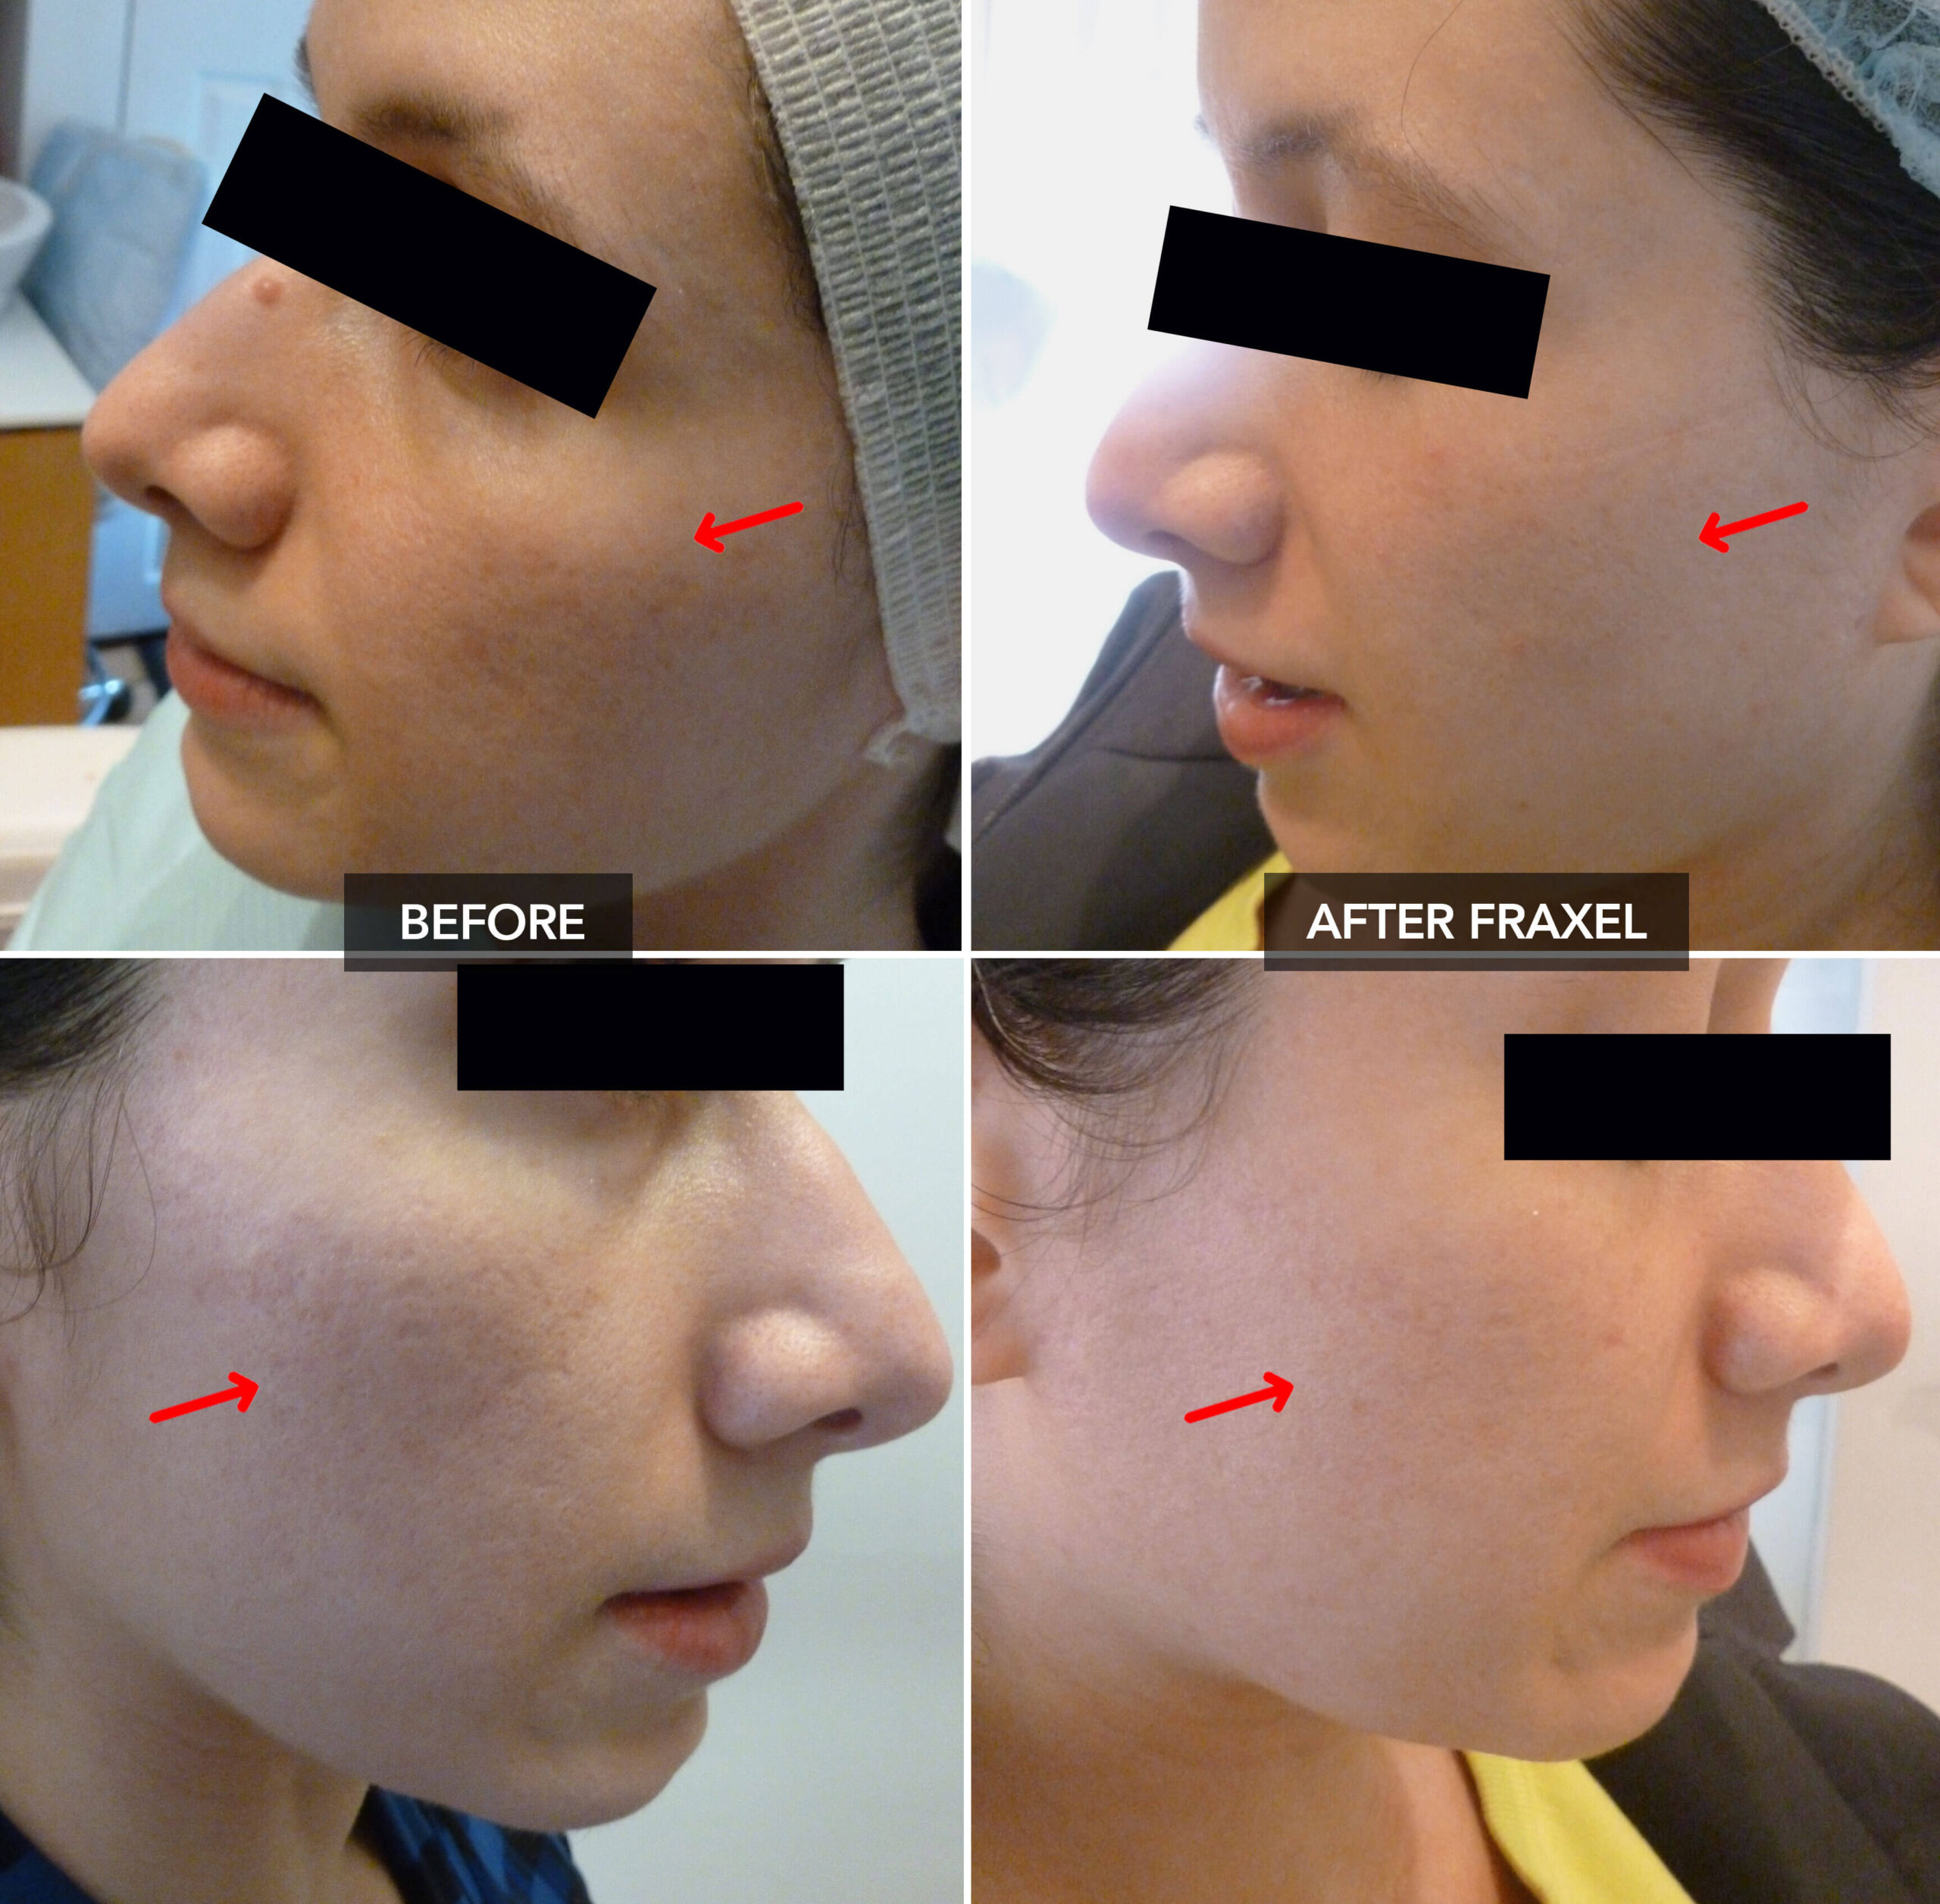 ACNE SCARRING – BEFORE & AFTER FRAXEL